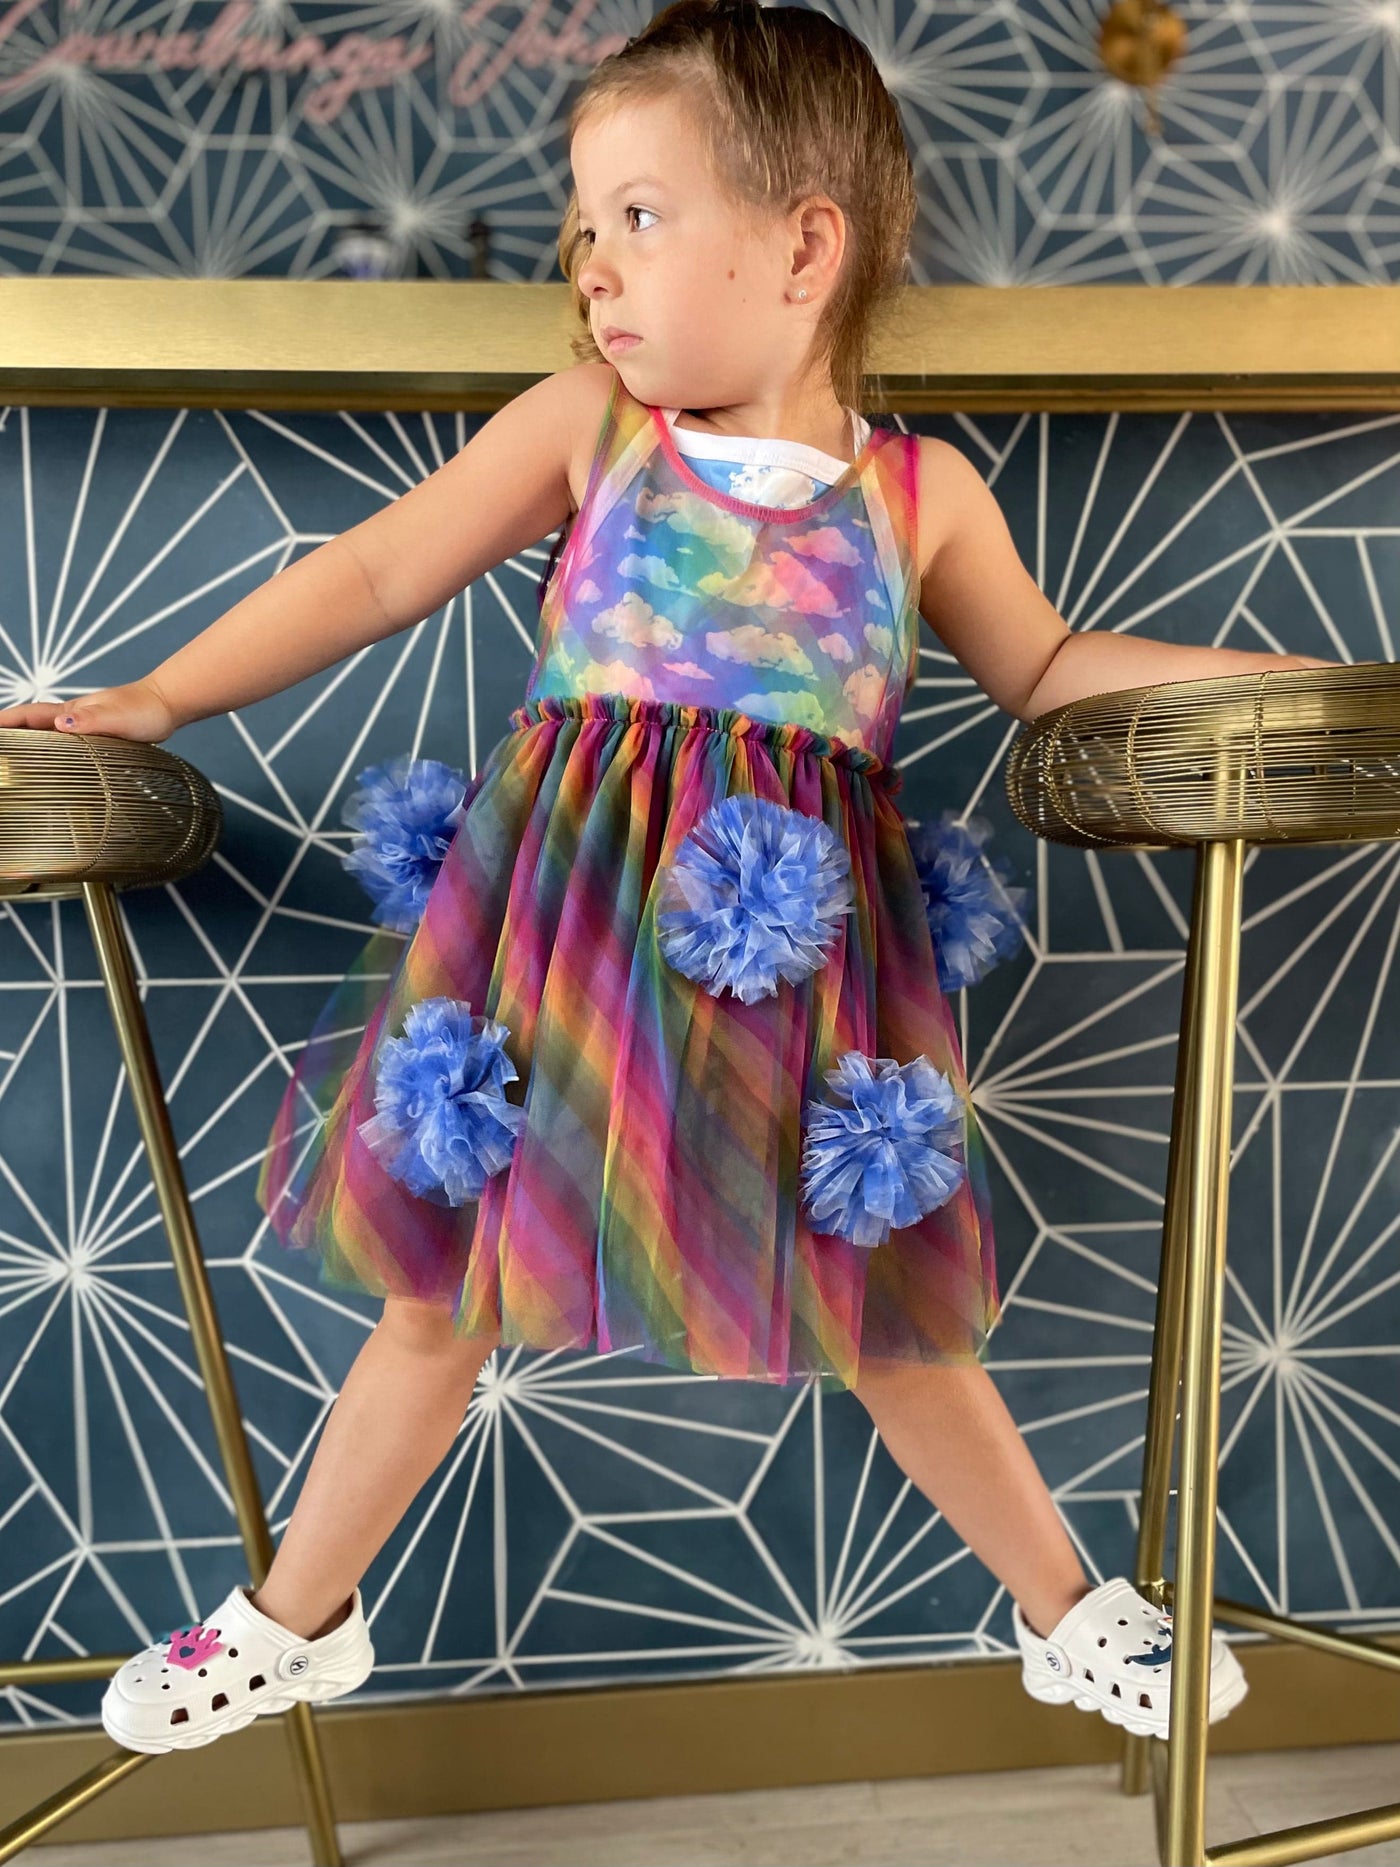 Best Day Ever Kids Baby & Toddler Dresses Perfect Day Tutu Dress buy online boutique kids clothing